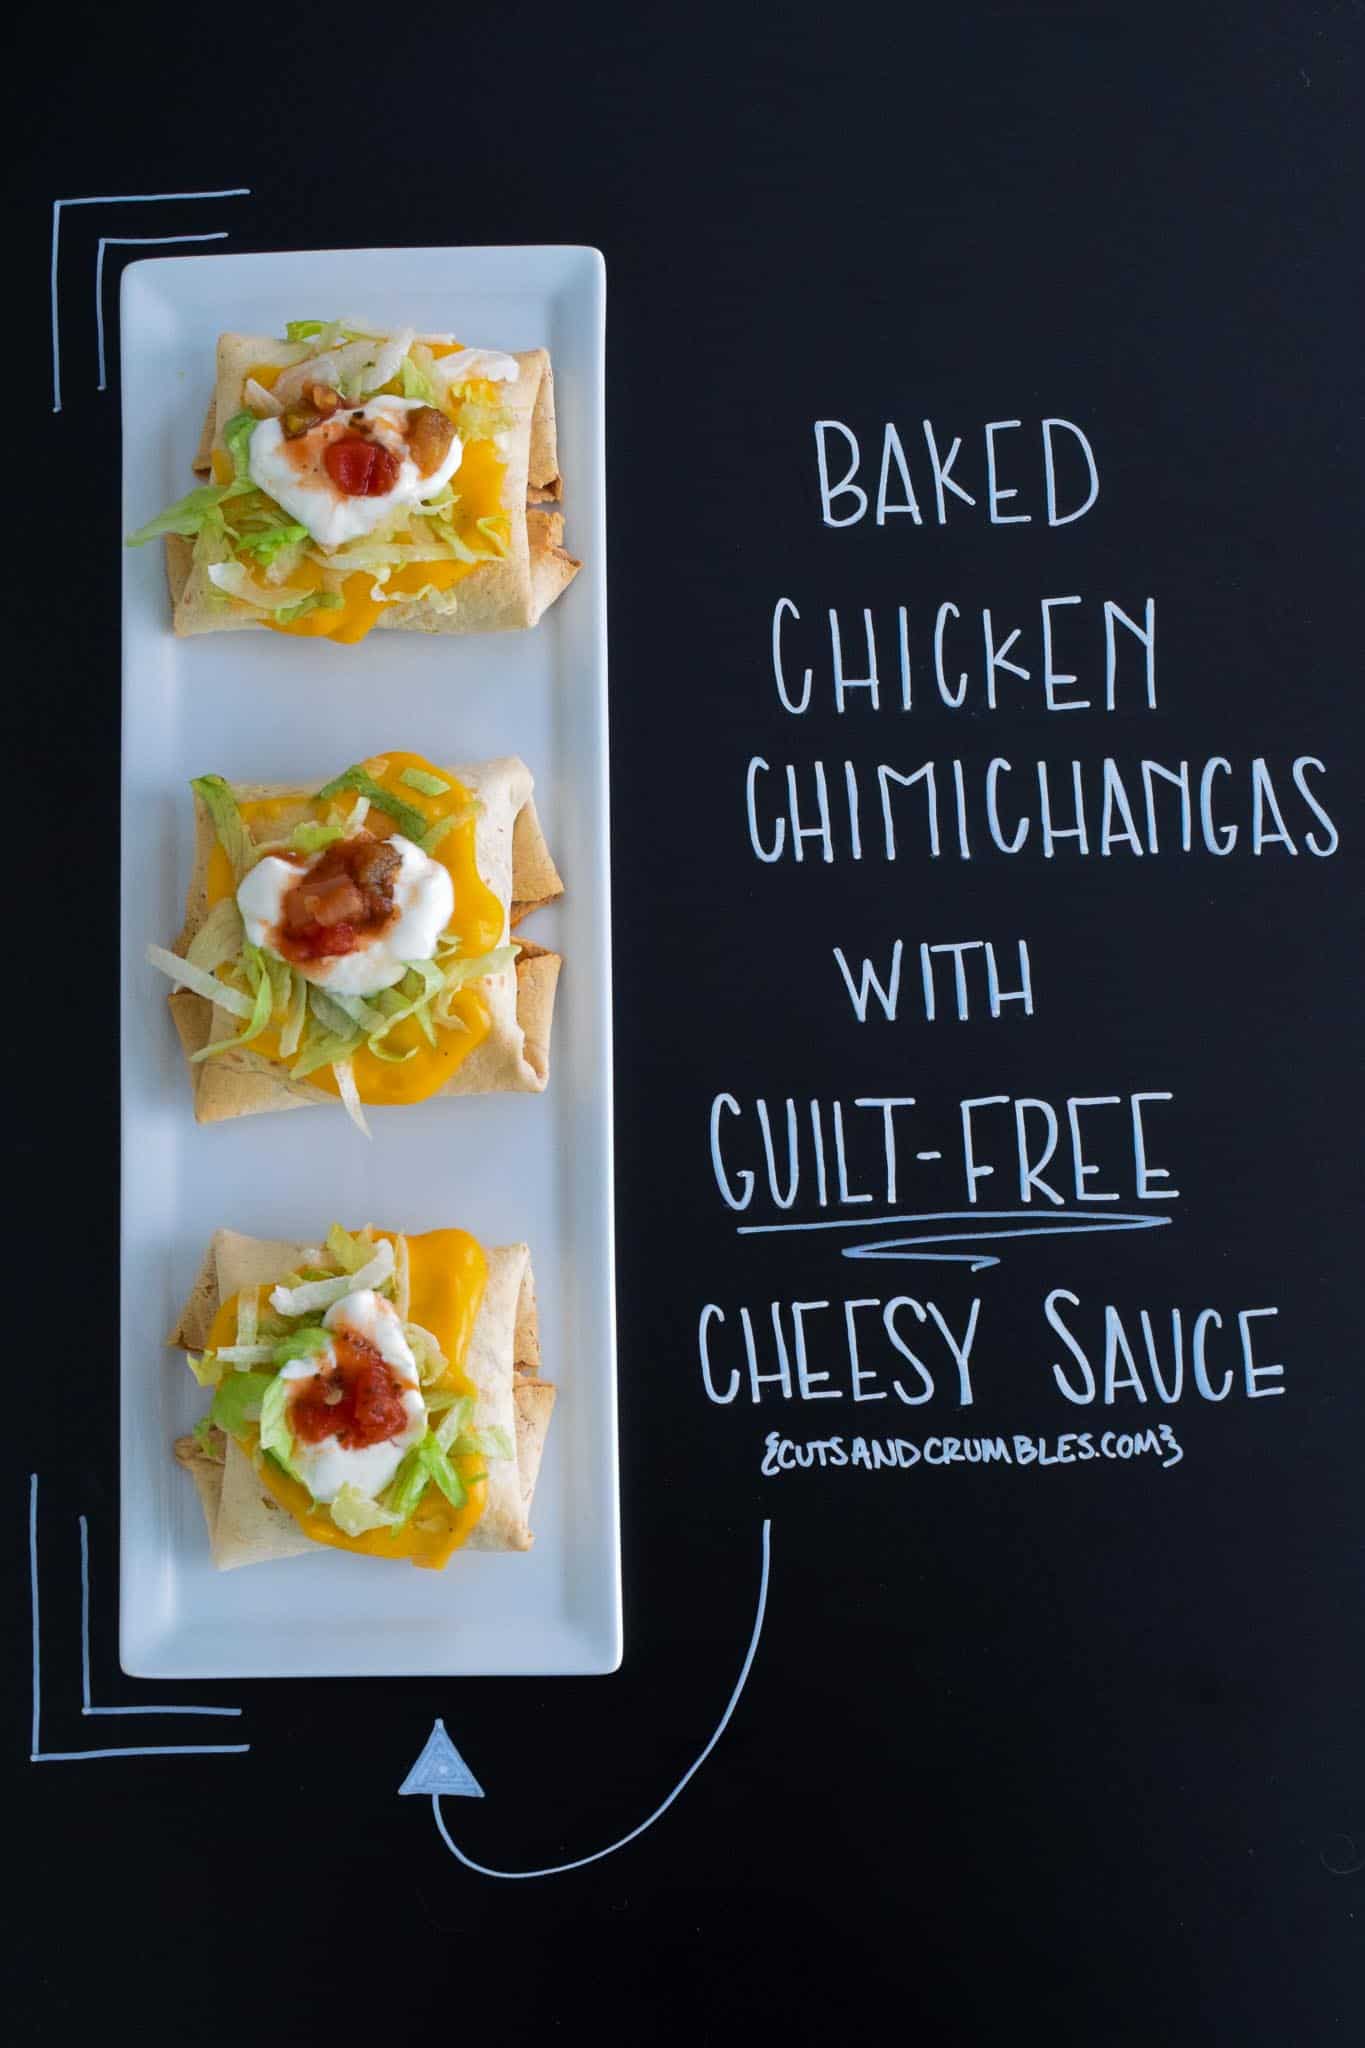 Baked Chimichangas with Guilt-Free Cheesy Sauce with title written on chalkboard